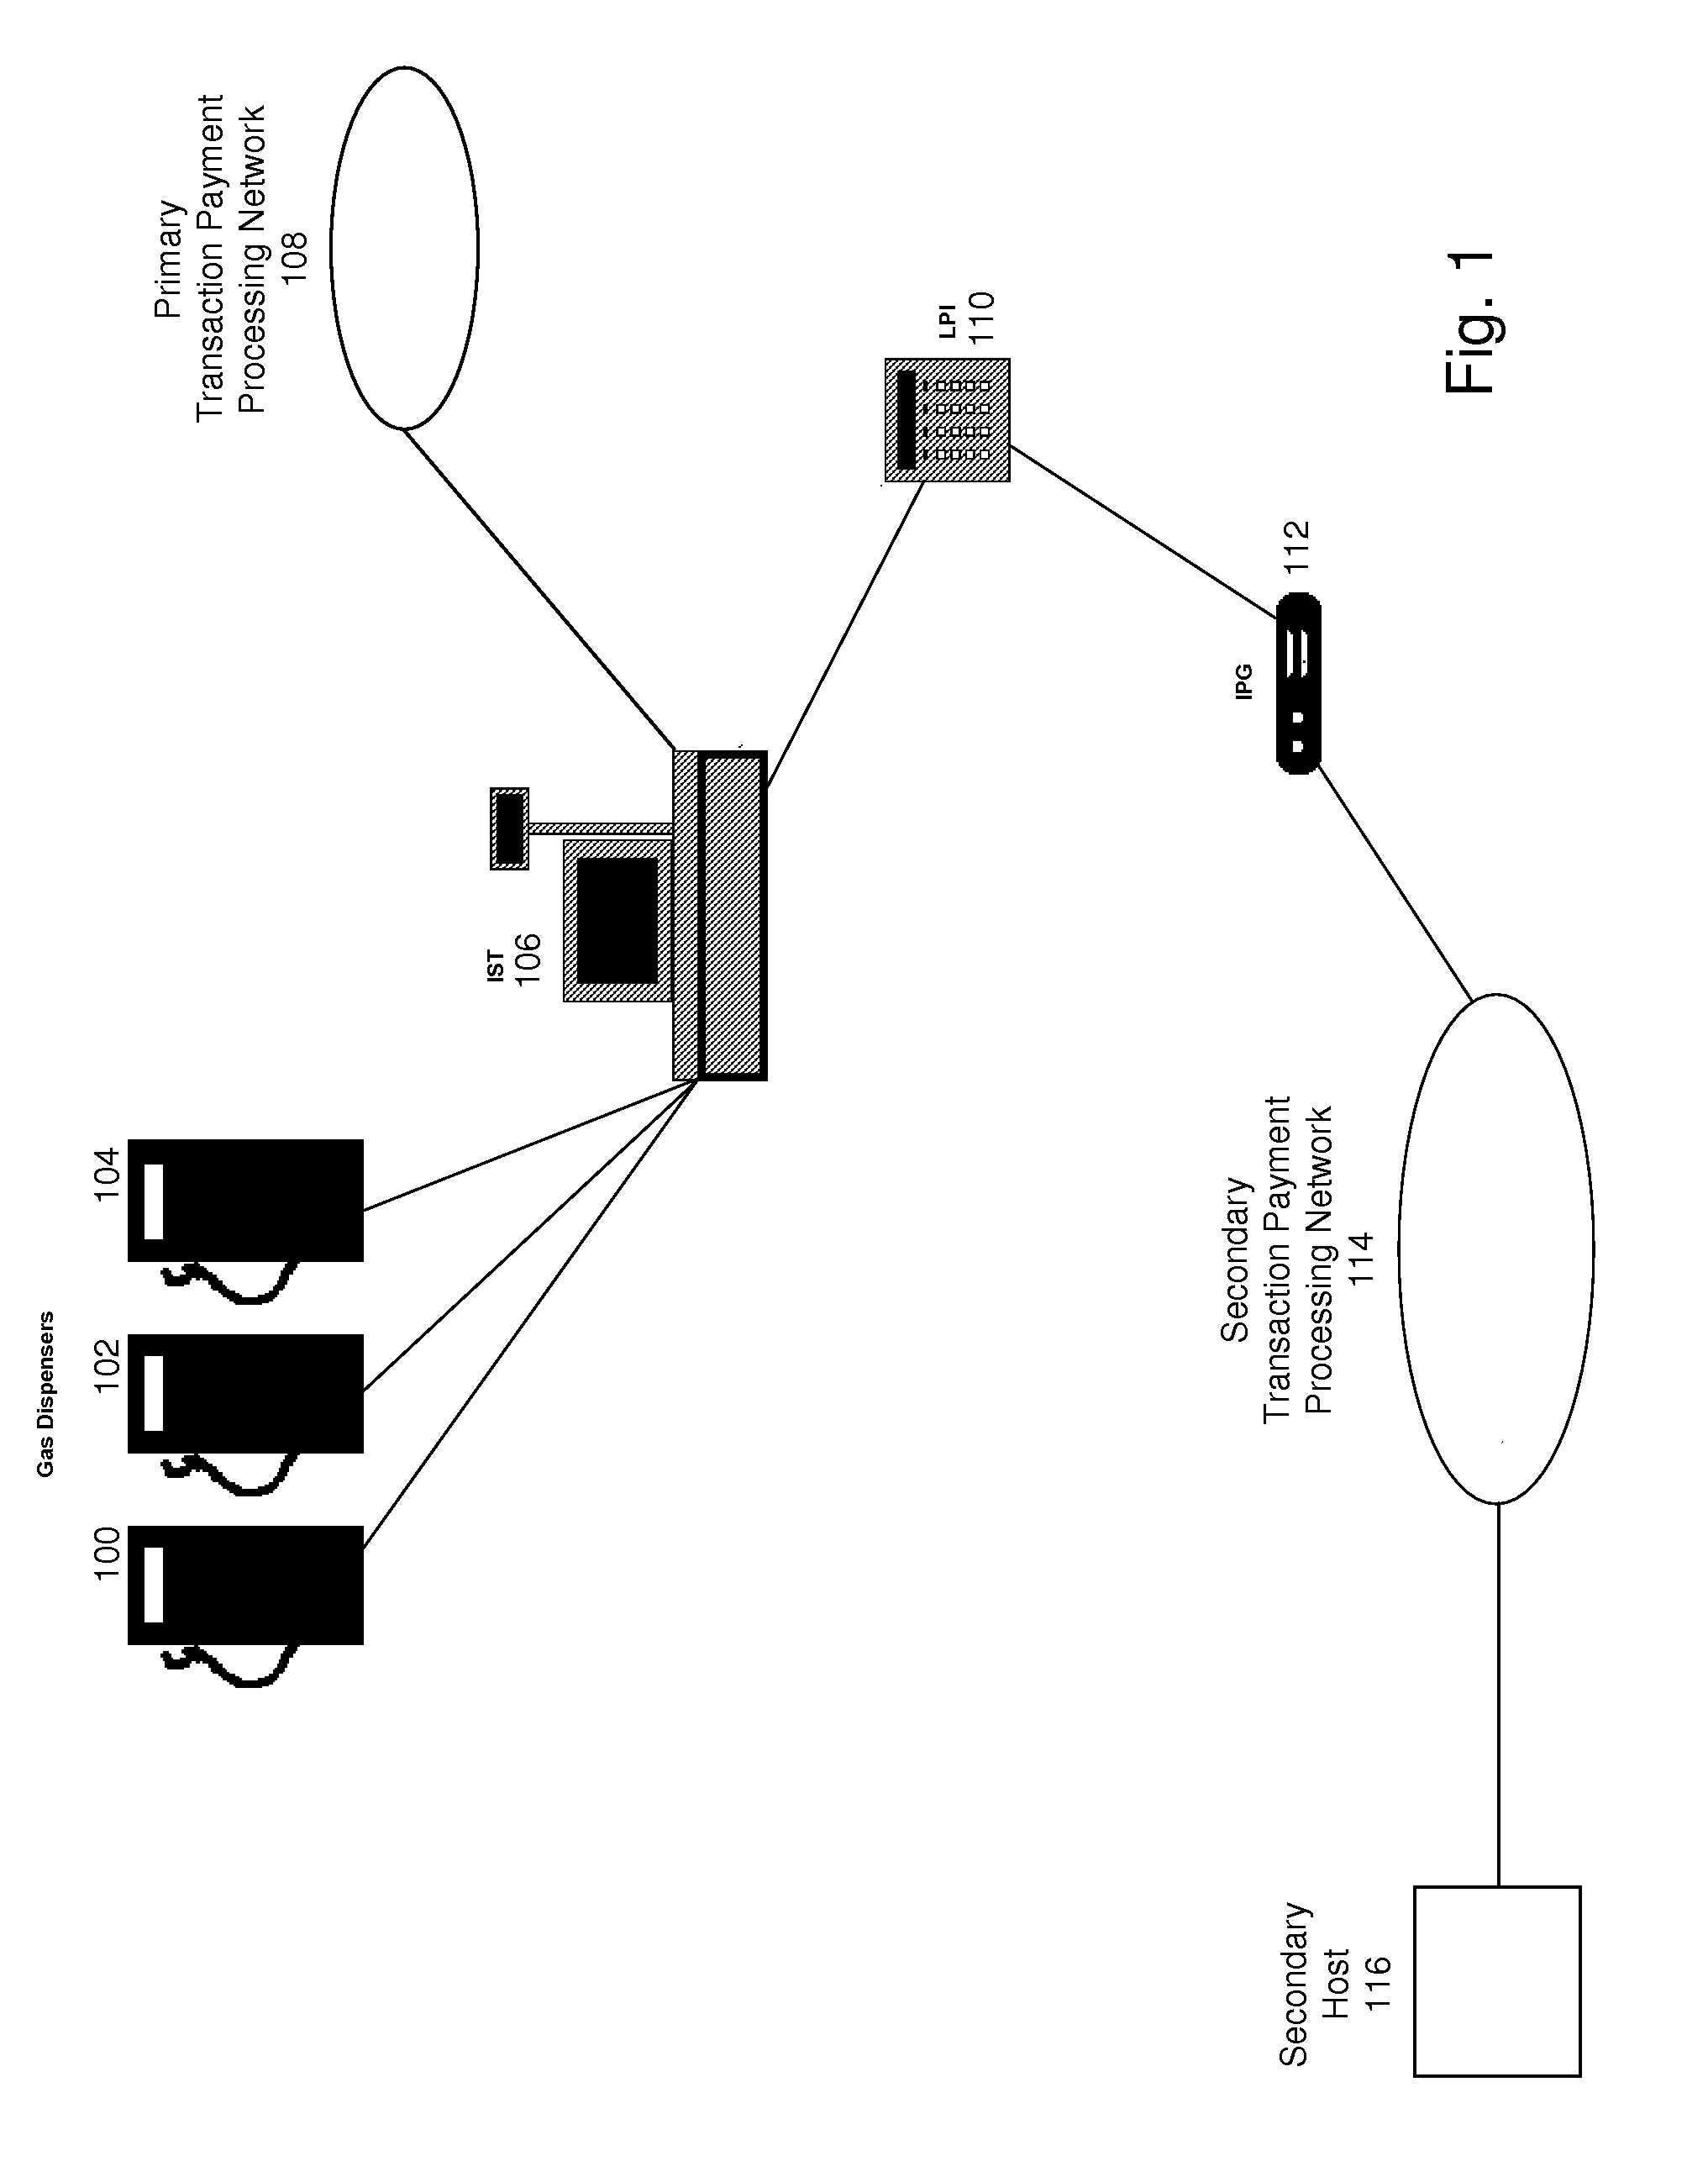 Point of sale system interface for processing of transactions at a secondary transaction payment network